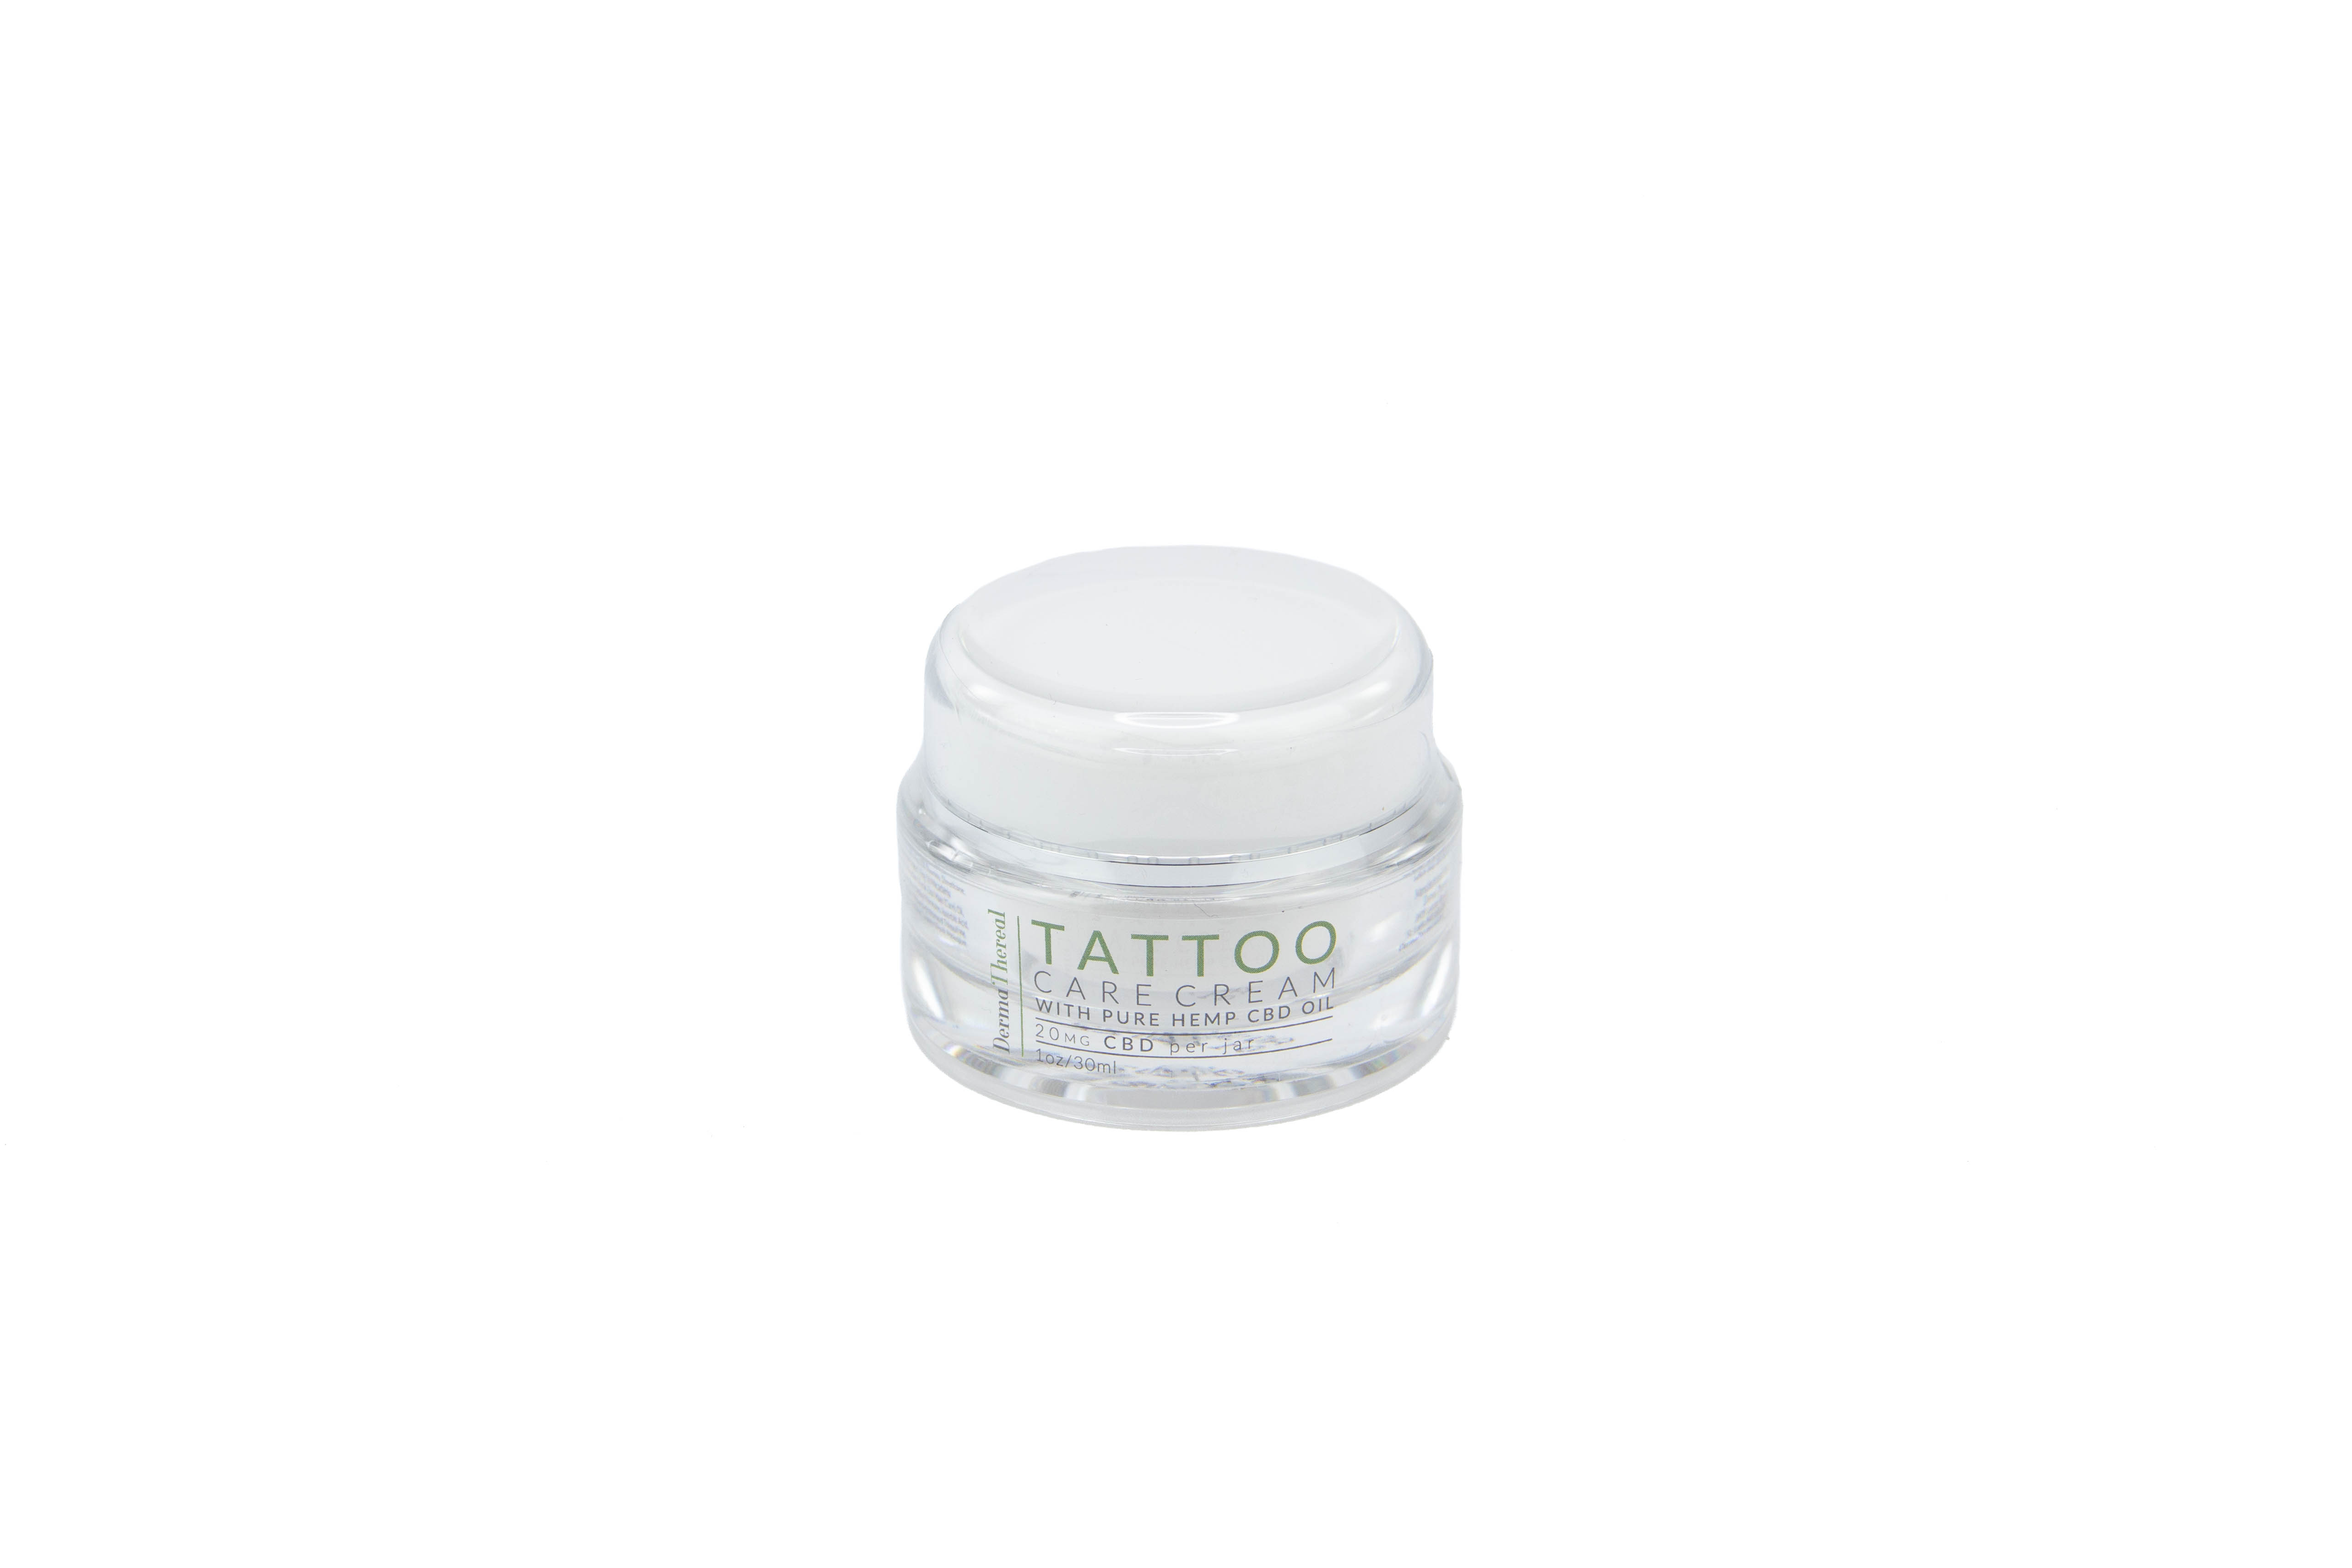 The 15 Best CBD Tattoo Aftercare Products